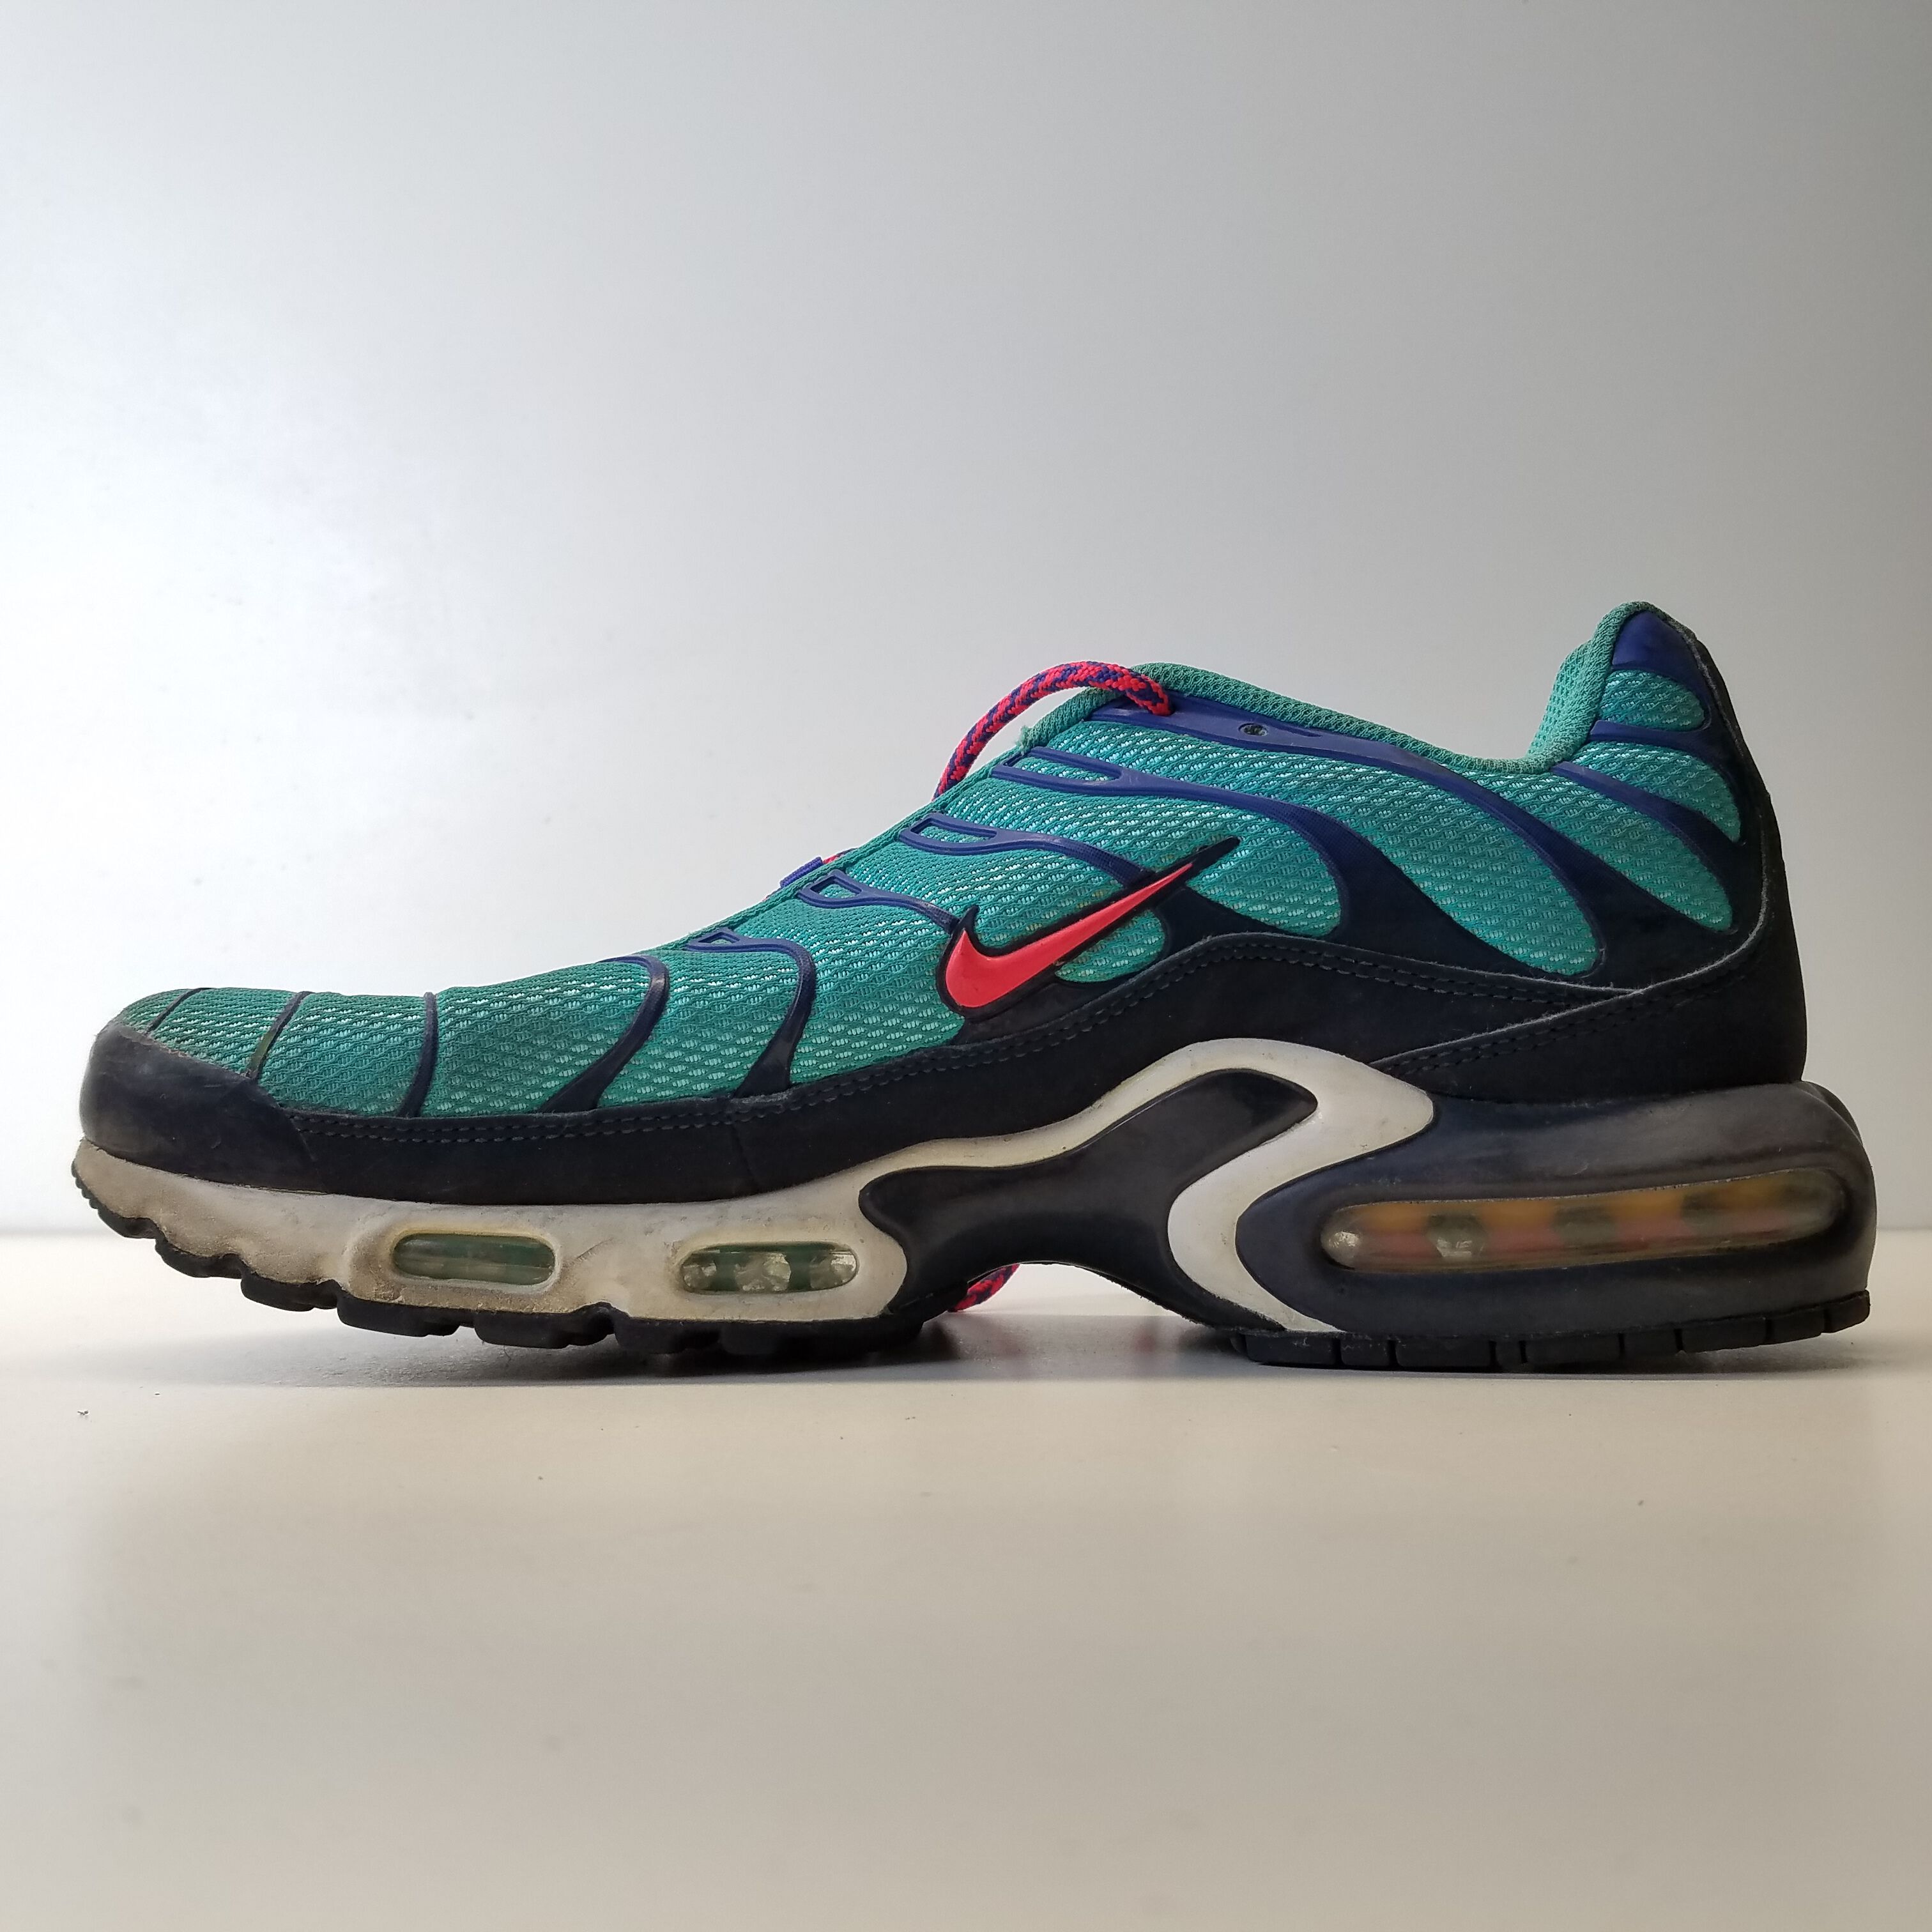 Buy the Nike Air Max Plus Discover Your Air Men Shoes Hyper Jade